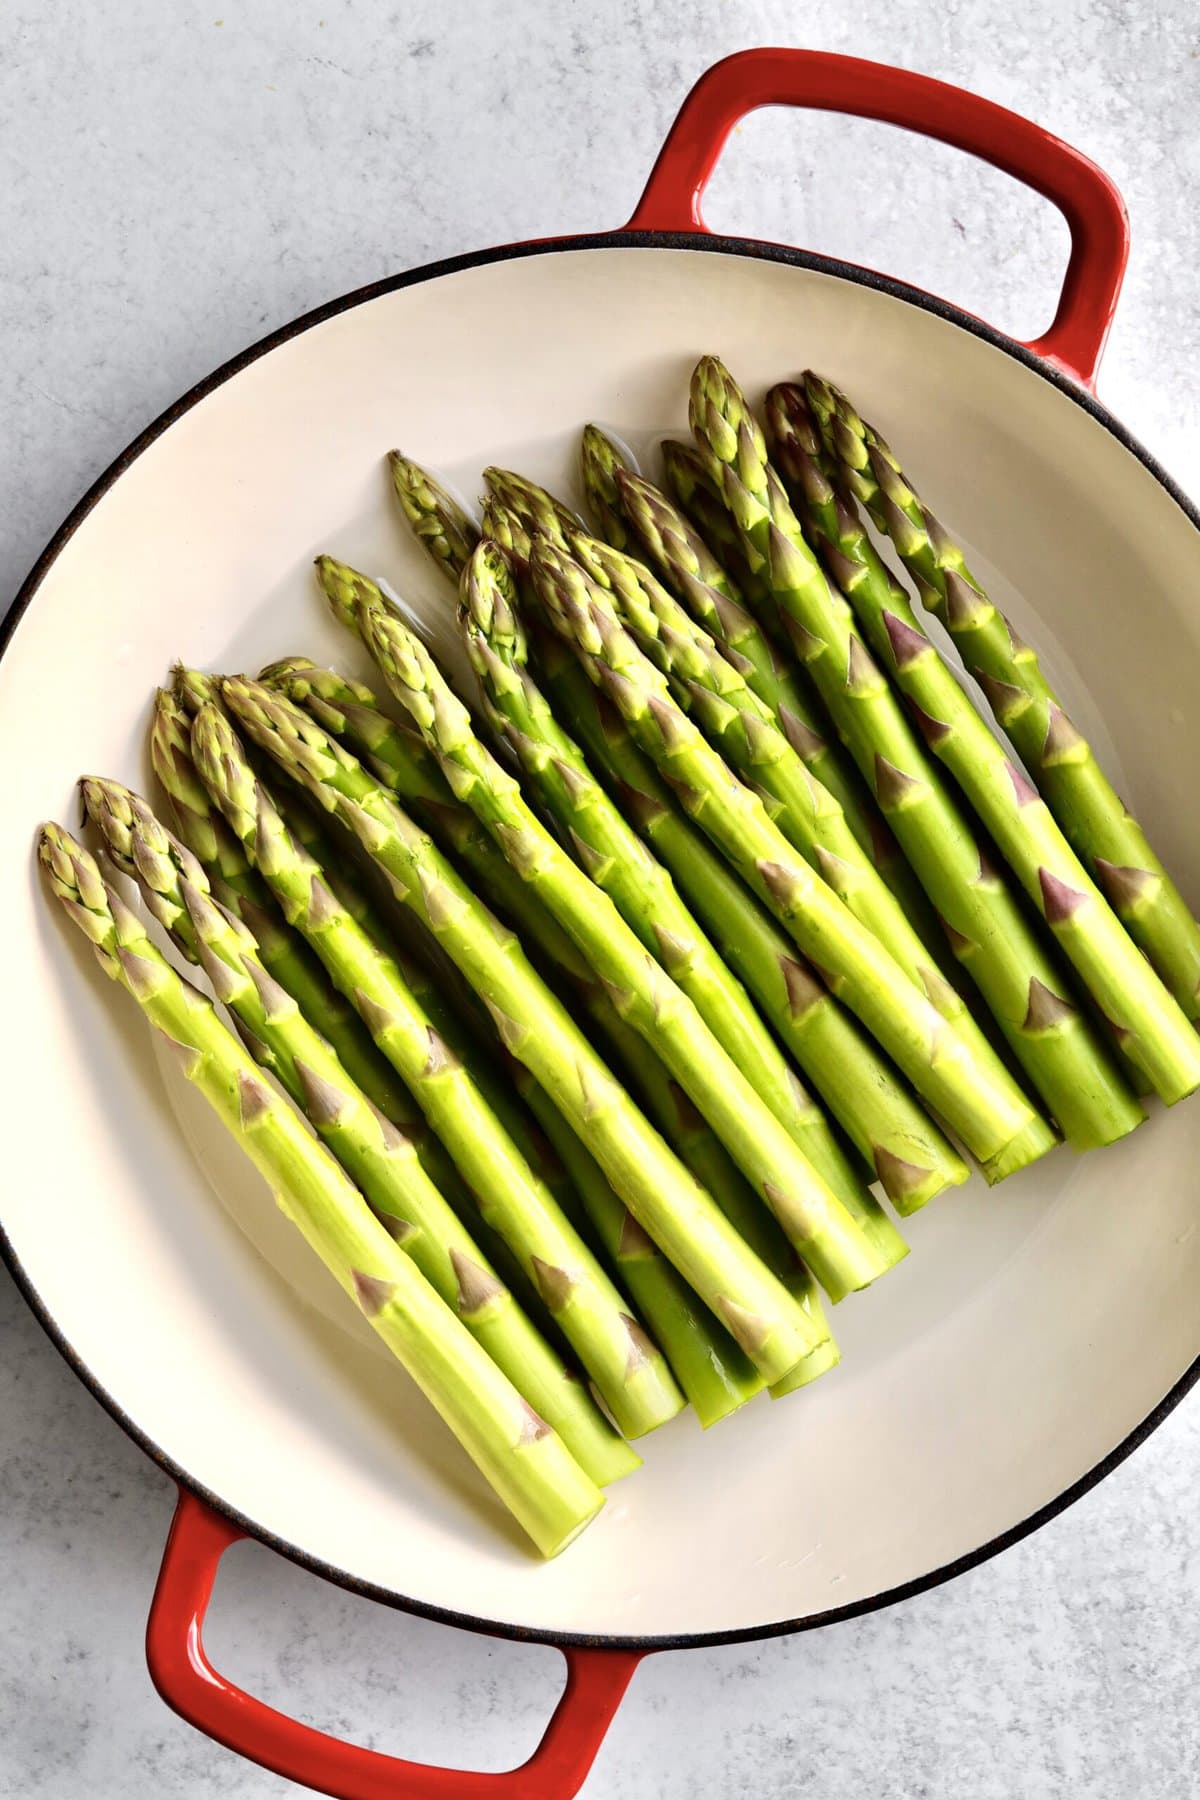 How to make simple steamed asparagus recipe: raw asparagus ready to steam in a shallow pot.